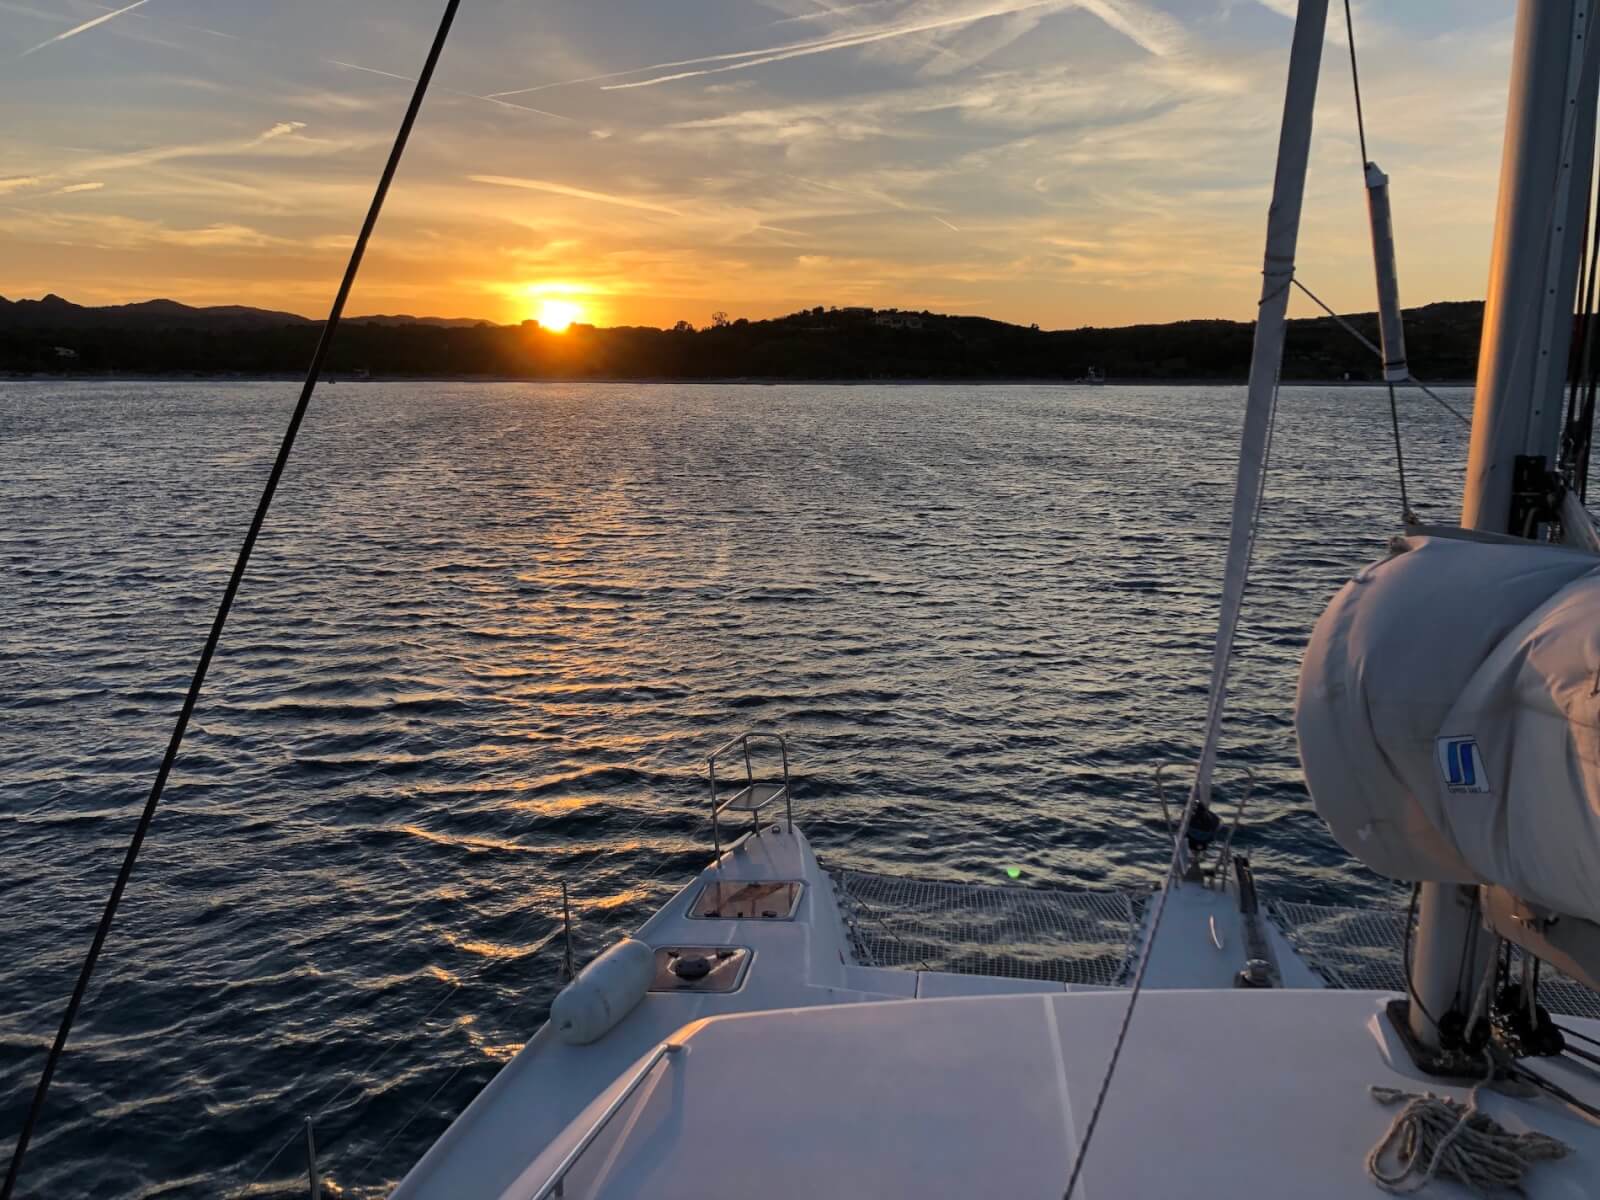 View of a sunset from a yacht